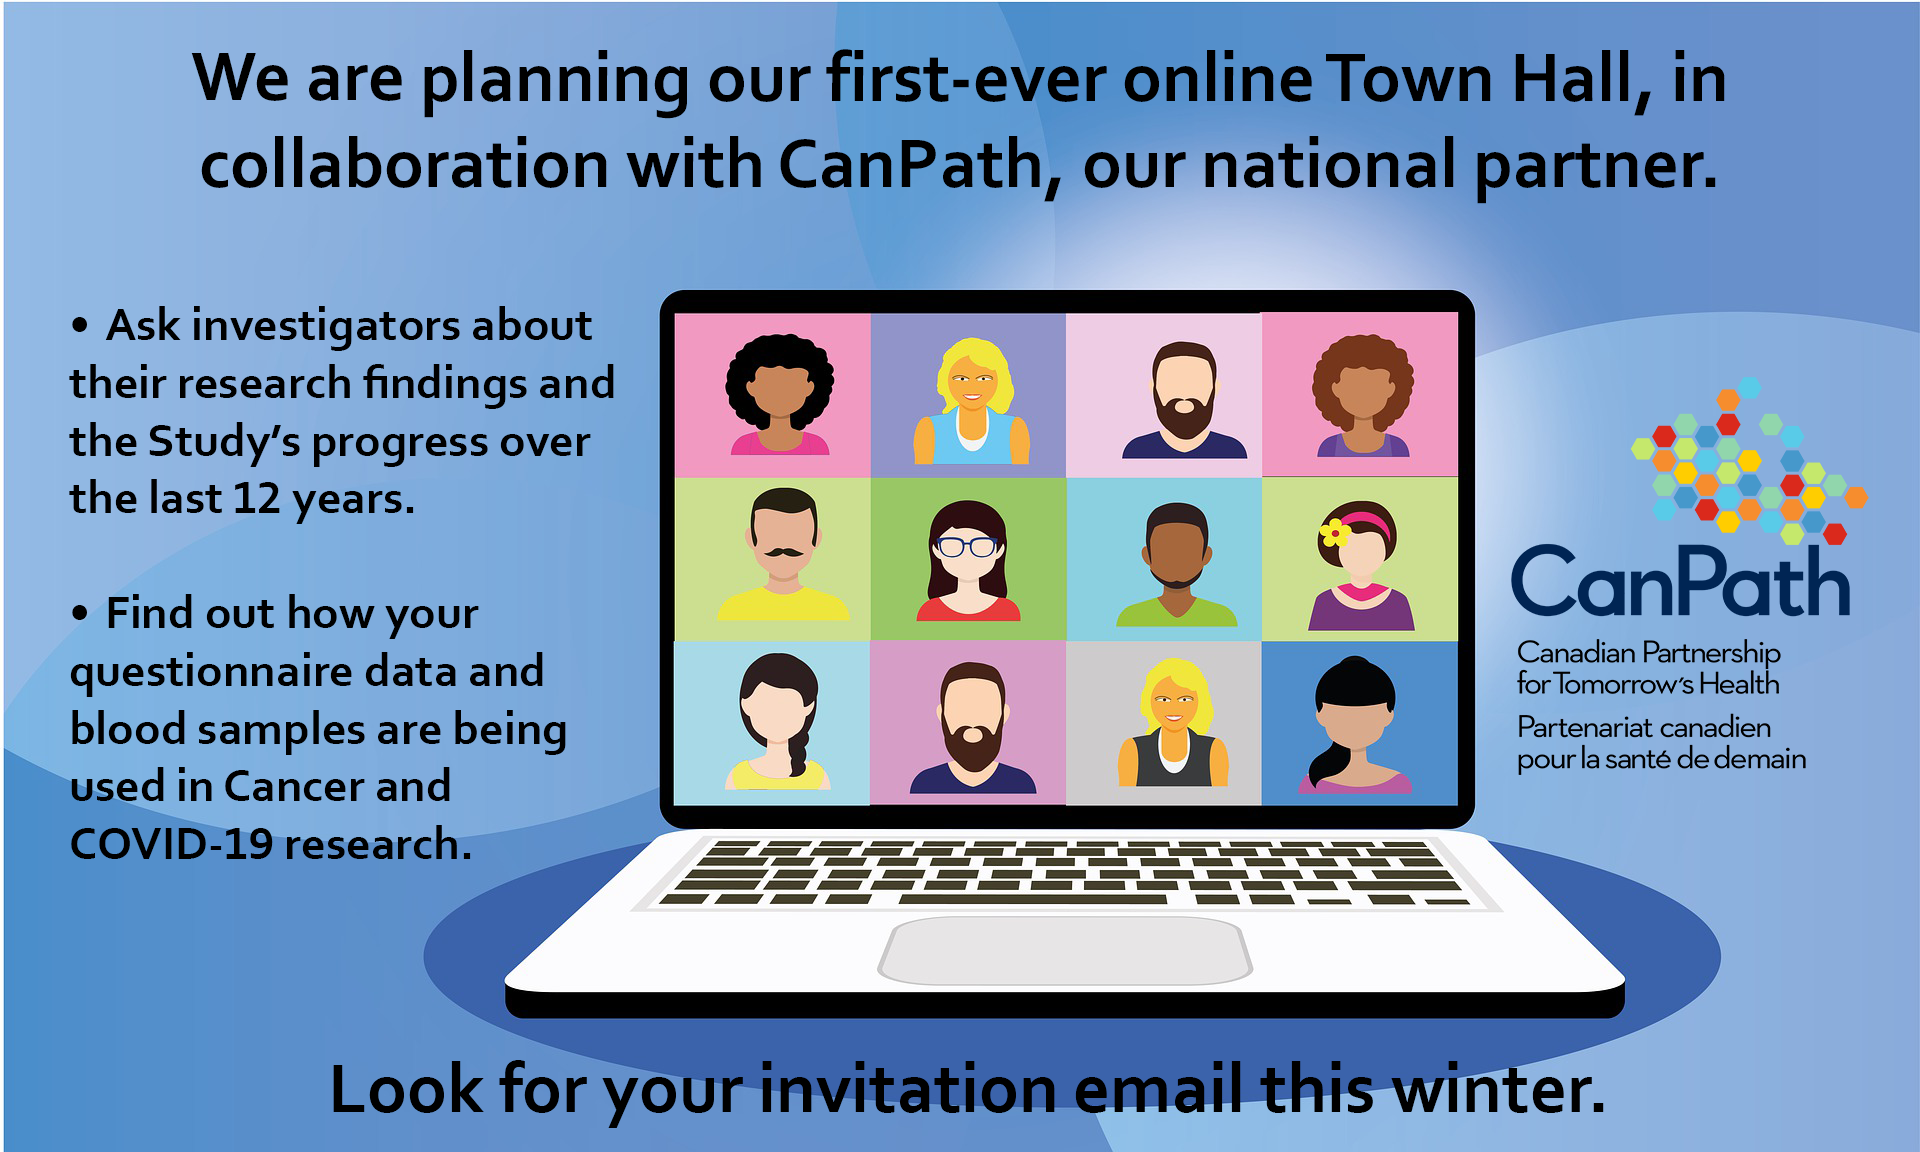 We are planning our first-ever online Town Hall, in collaboration with CanPath, our national partner. Ask investigators about their research findings and the Study’s progress over the last 12 years. Find out how your questionnaire data and blood samples are being used in Cancer and COVID-19 research. Look for your invitation email this winter.